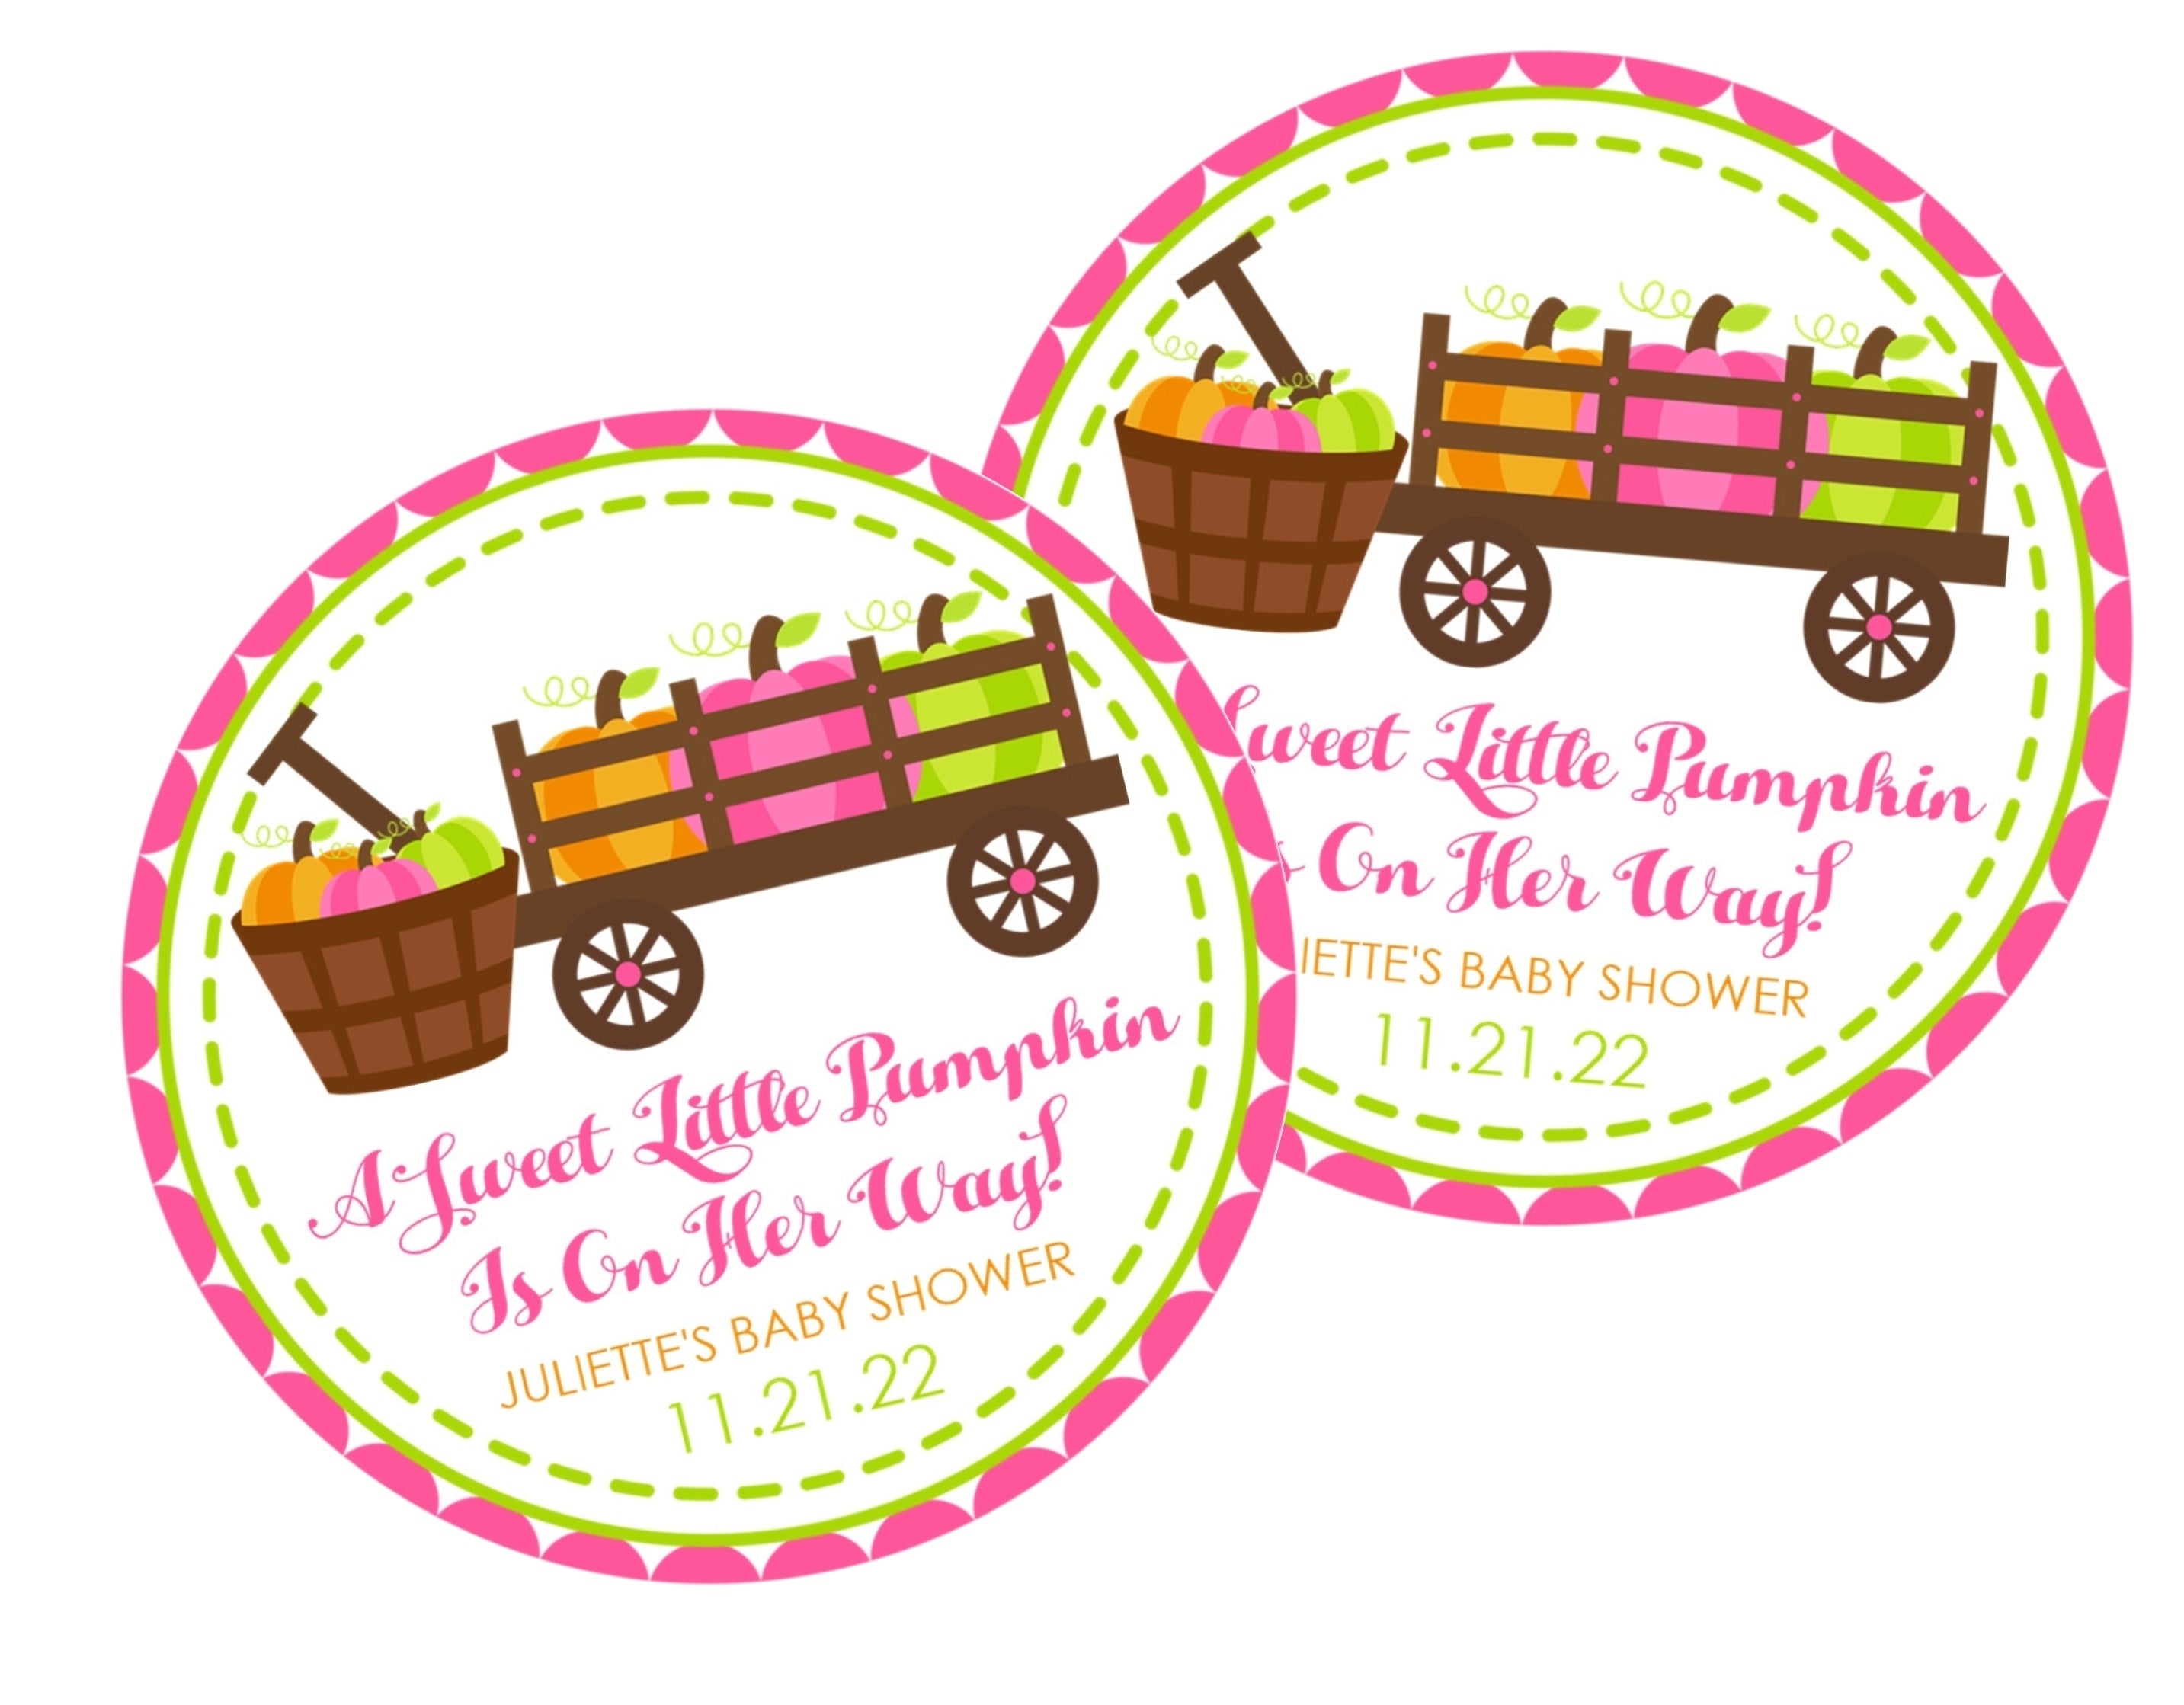 Girls Fall Pumpkin Baby Shower Stickers Or Favor Tags